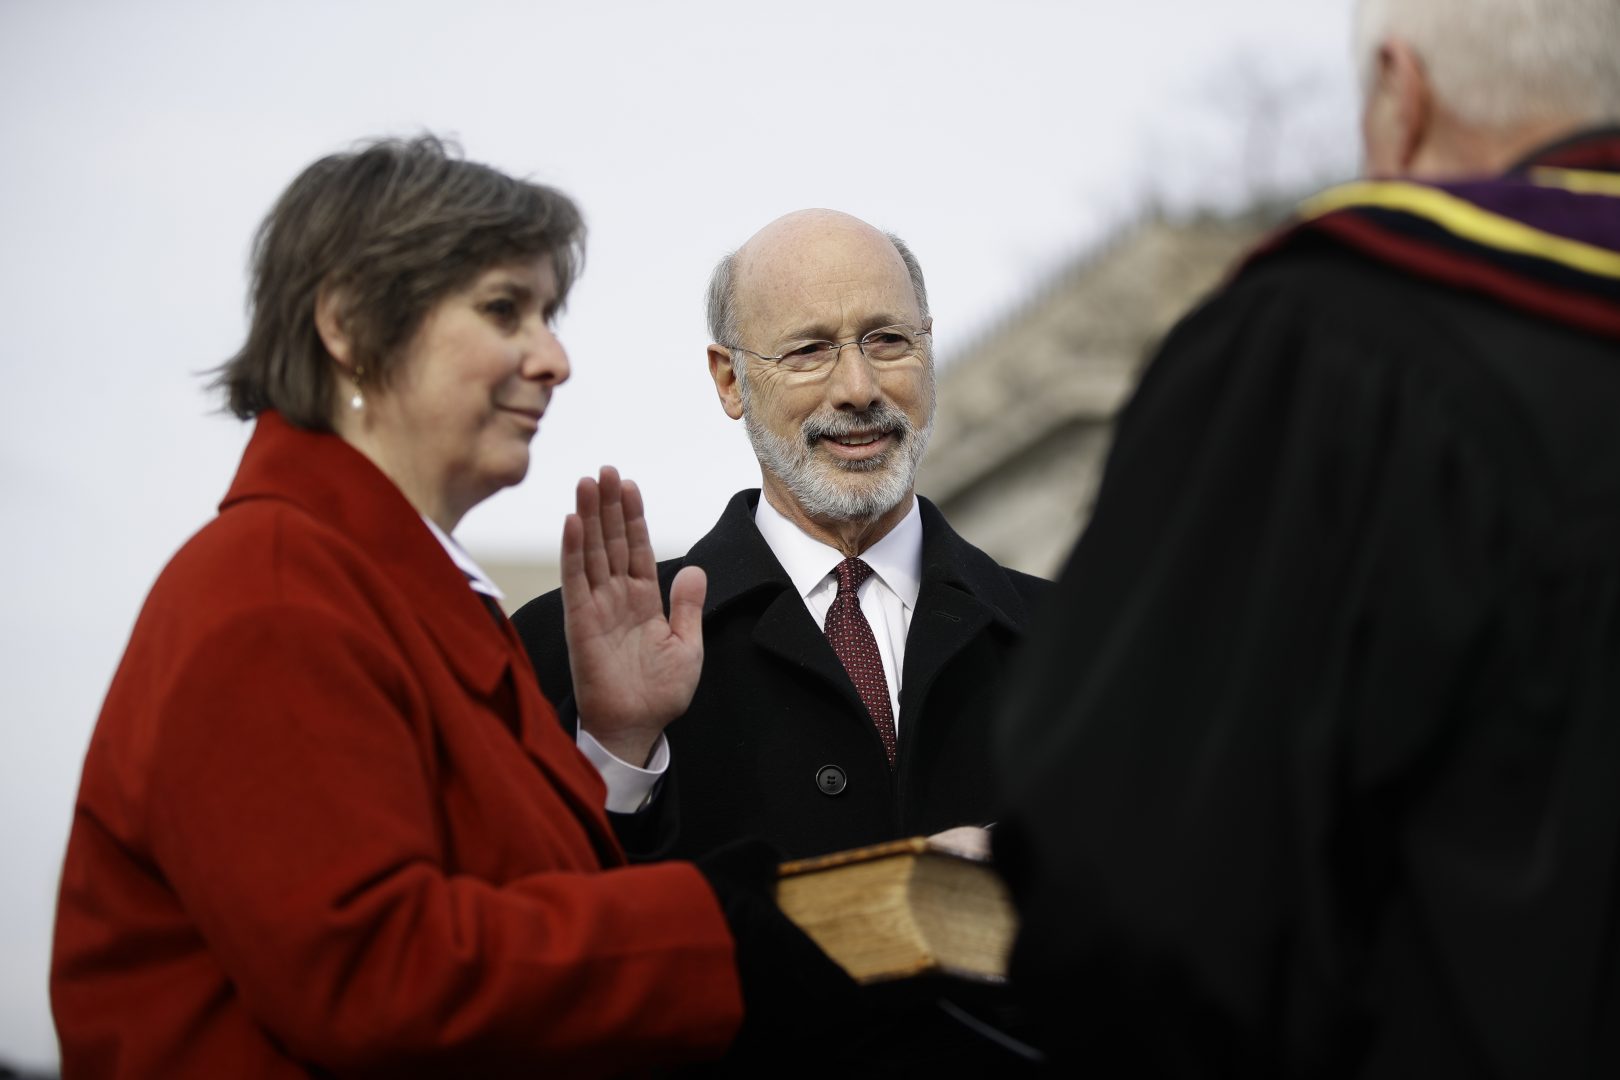 Pennsylvania Gov. Tom Wolf, accompanied by his wife Frances, takes the Oath of Office as he is sworn in for his second term, Tuesday, Jan. 15, 2019, at the state Capitol in Harrisburg, Pa. 